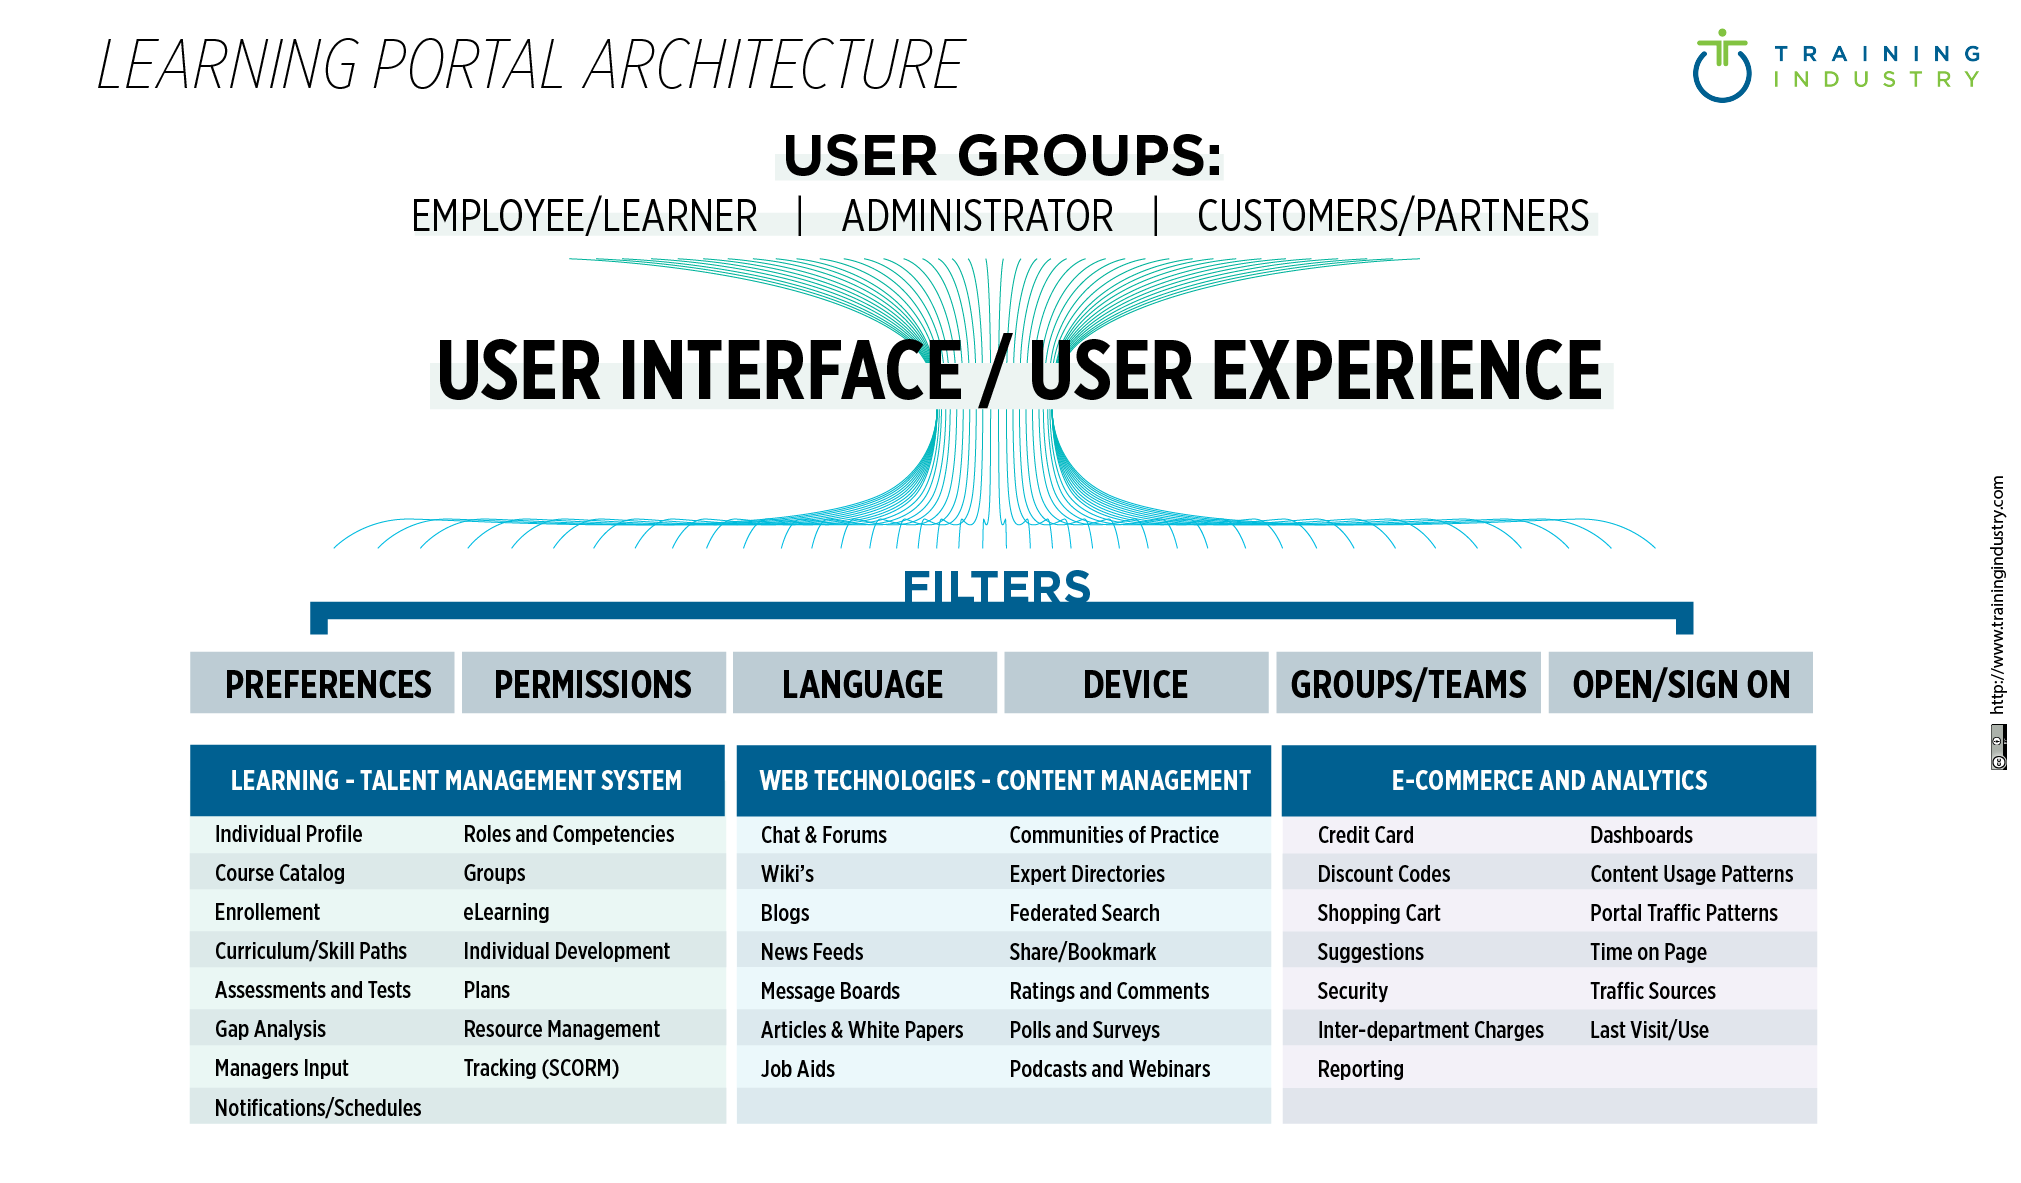 Learning Portal Architecture _485x 284